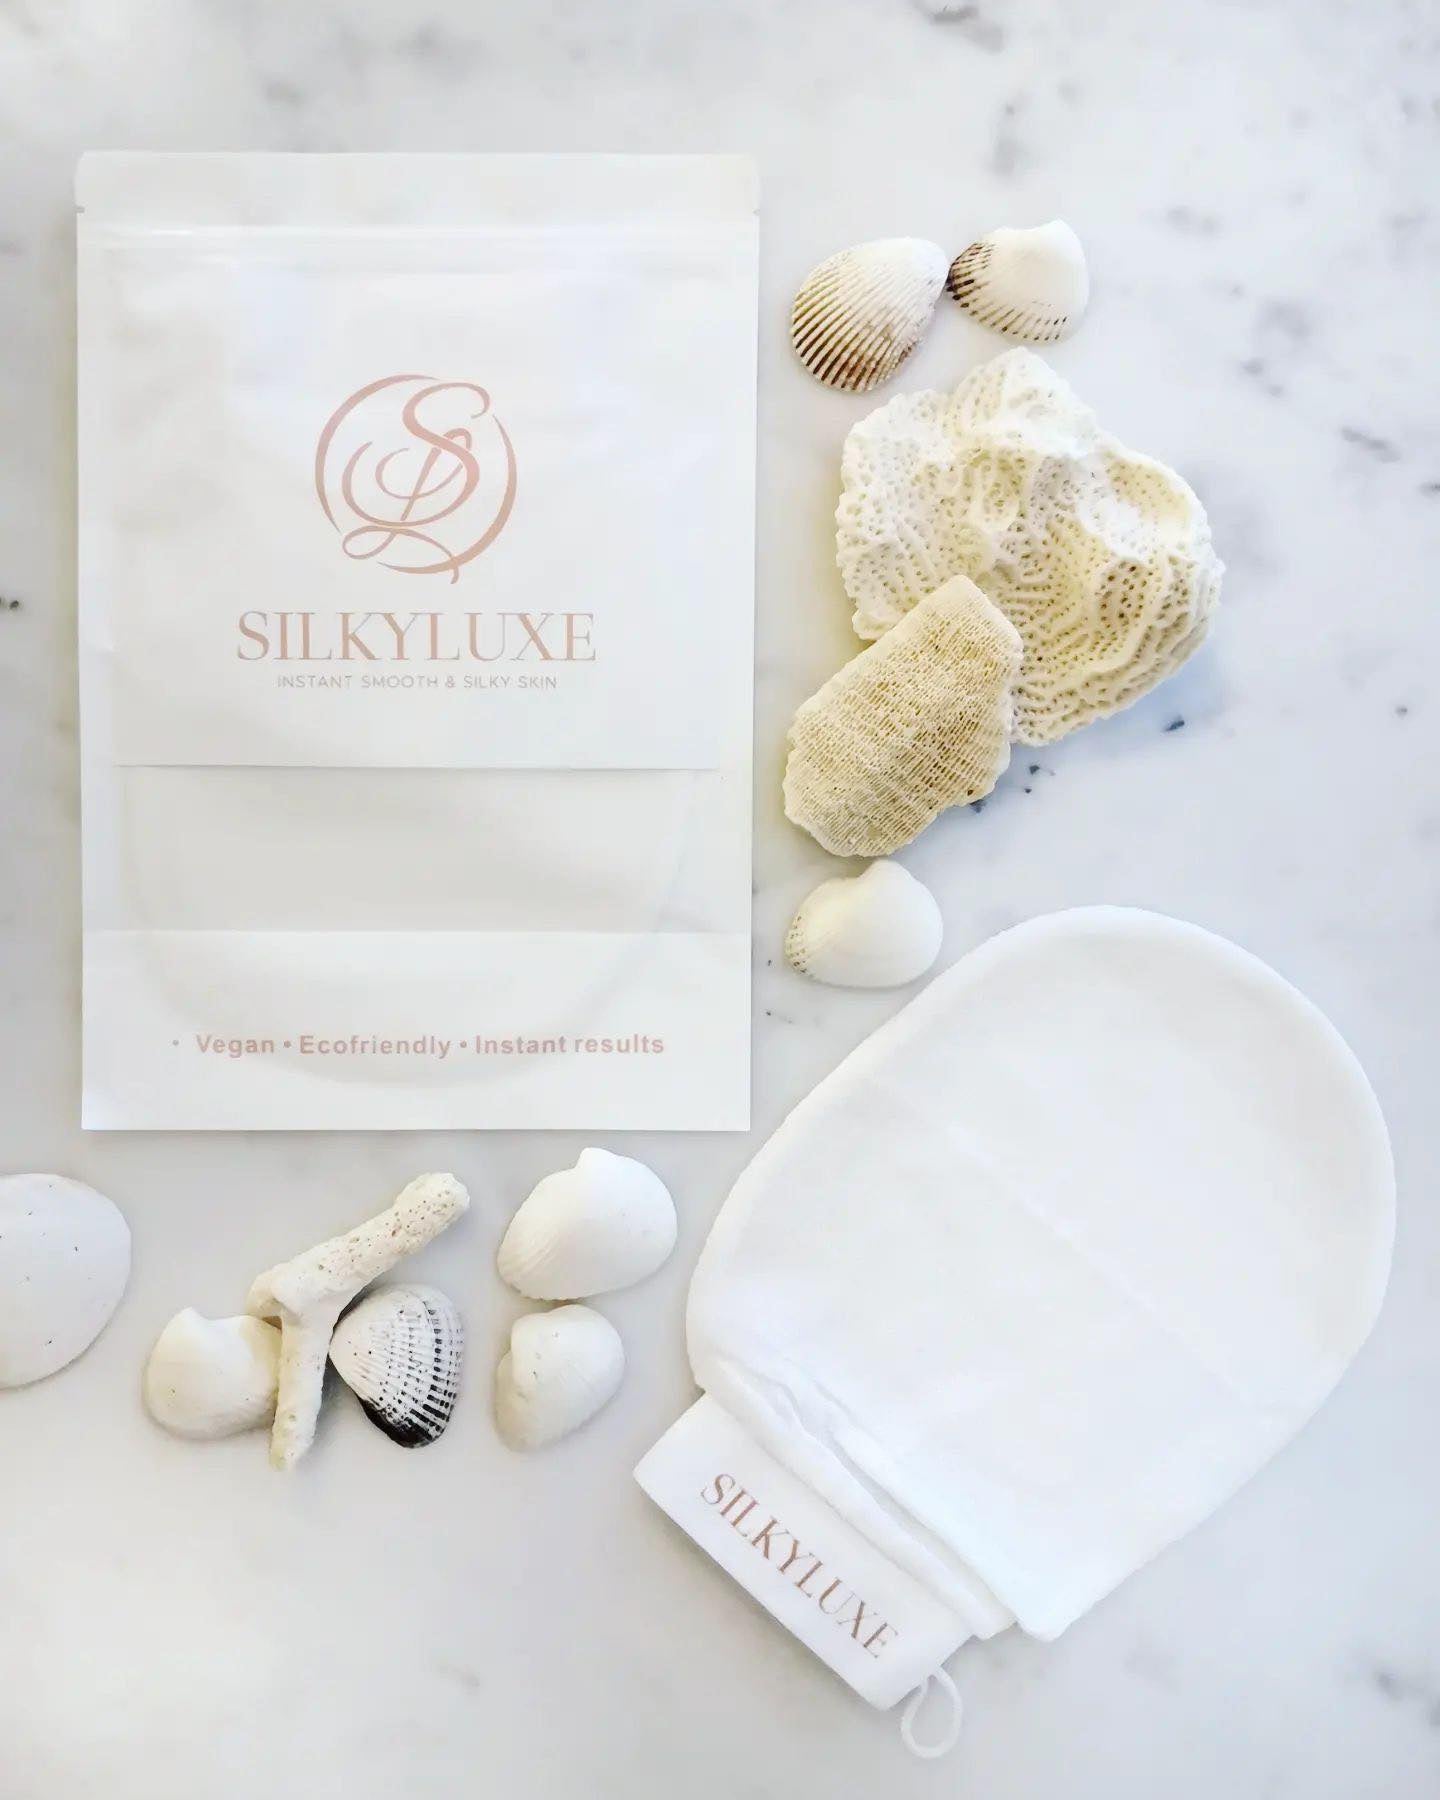 Shower rituals to reduce Stress with Silkyluxe